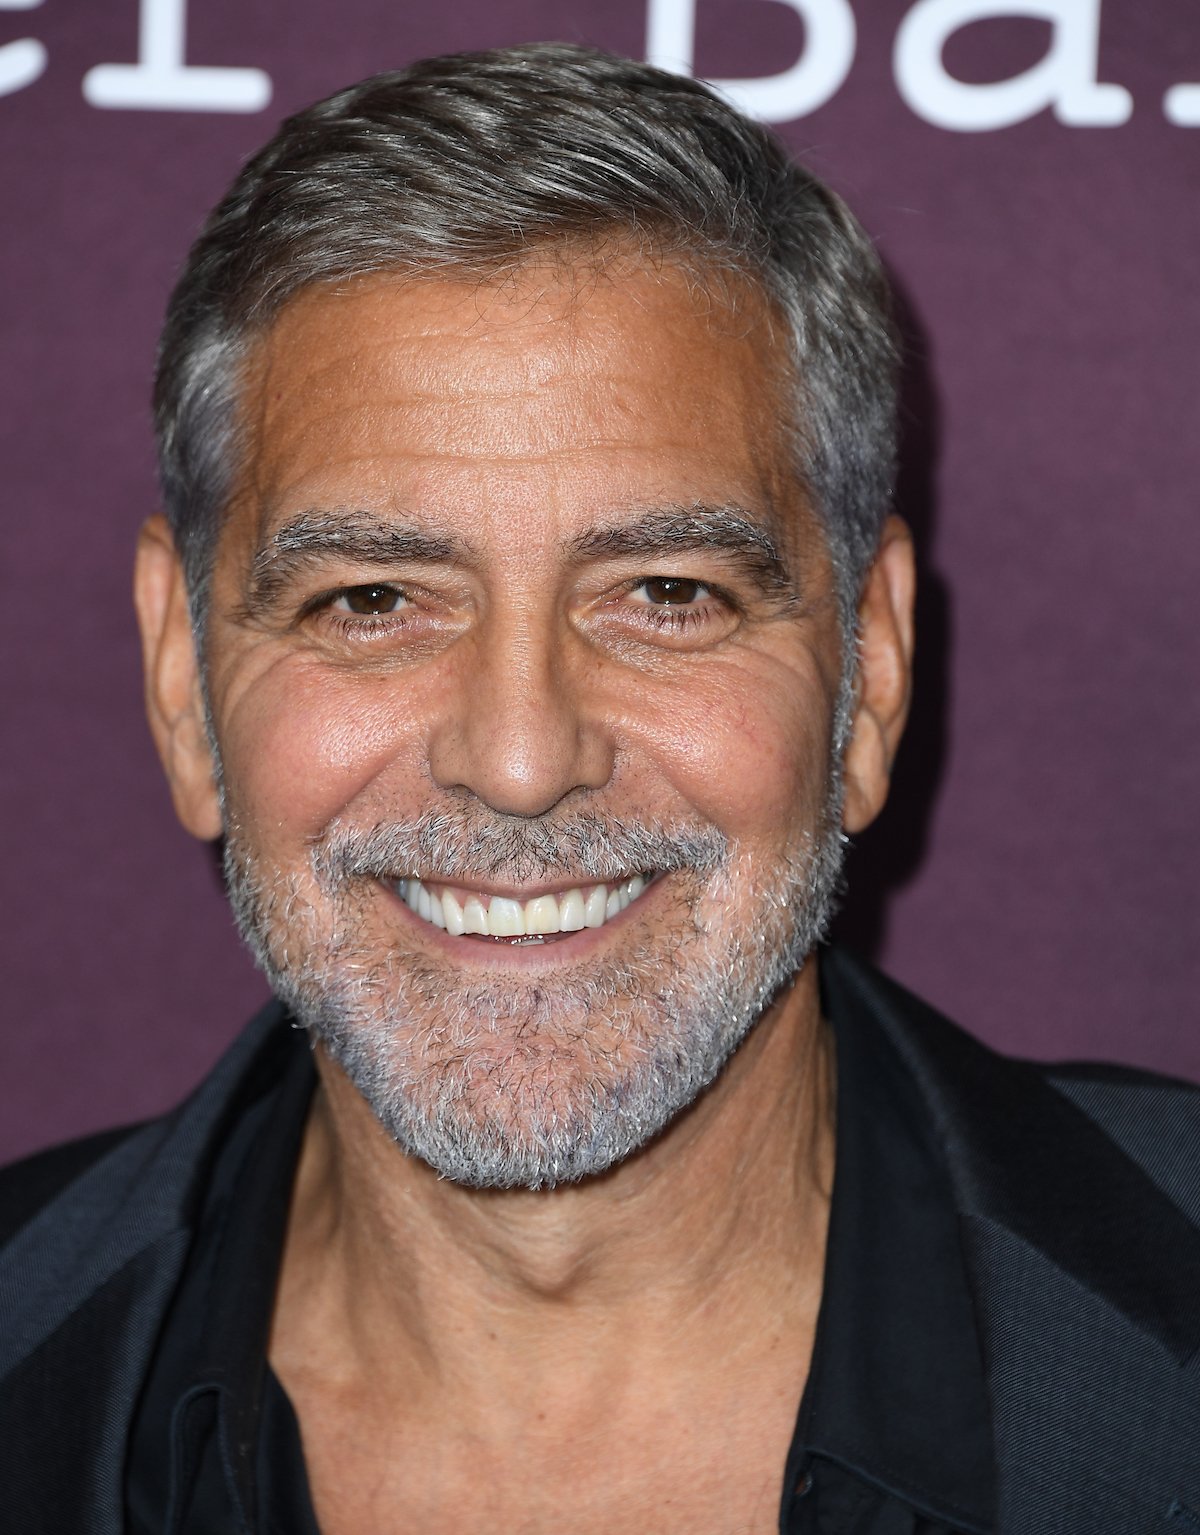 Close-up of George Clooney's face smiling for the camera.